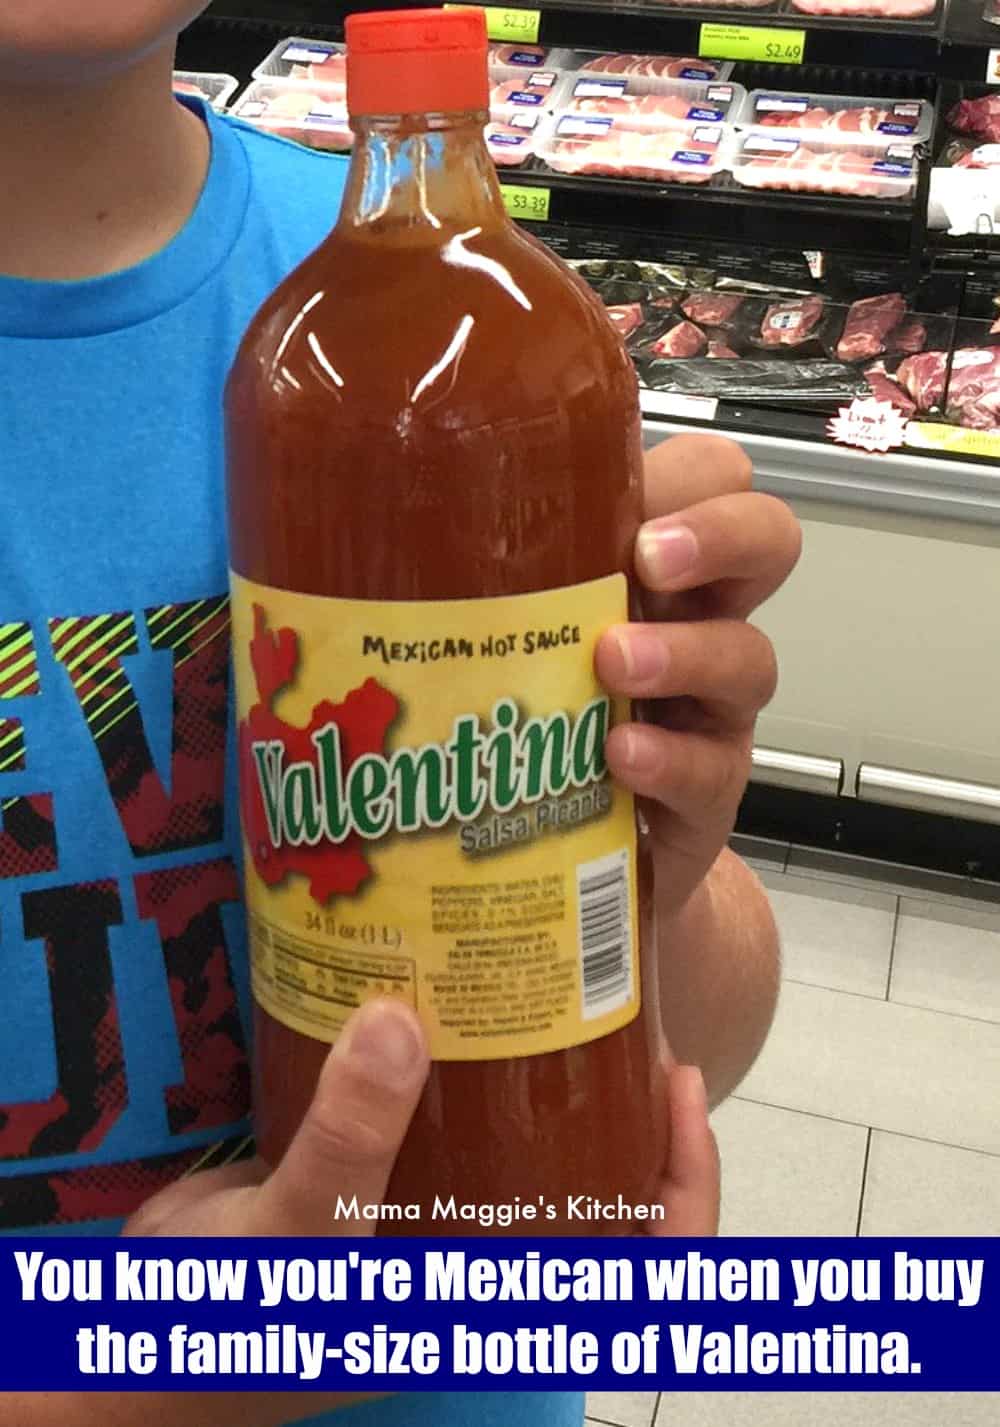 A hand holding a large bottle of Valentina hot sauce.